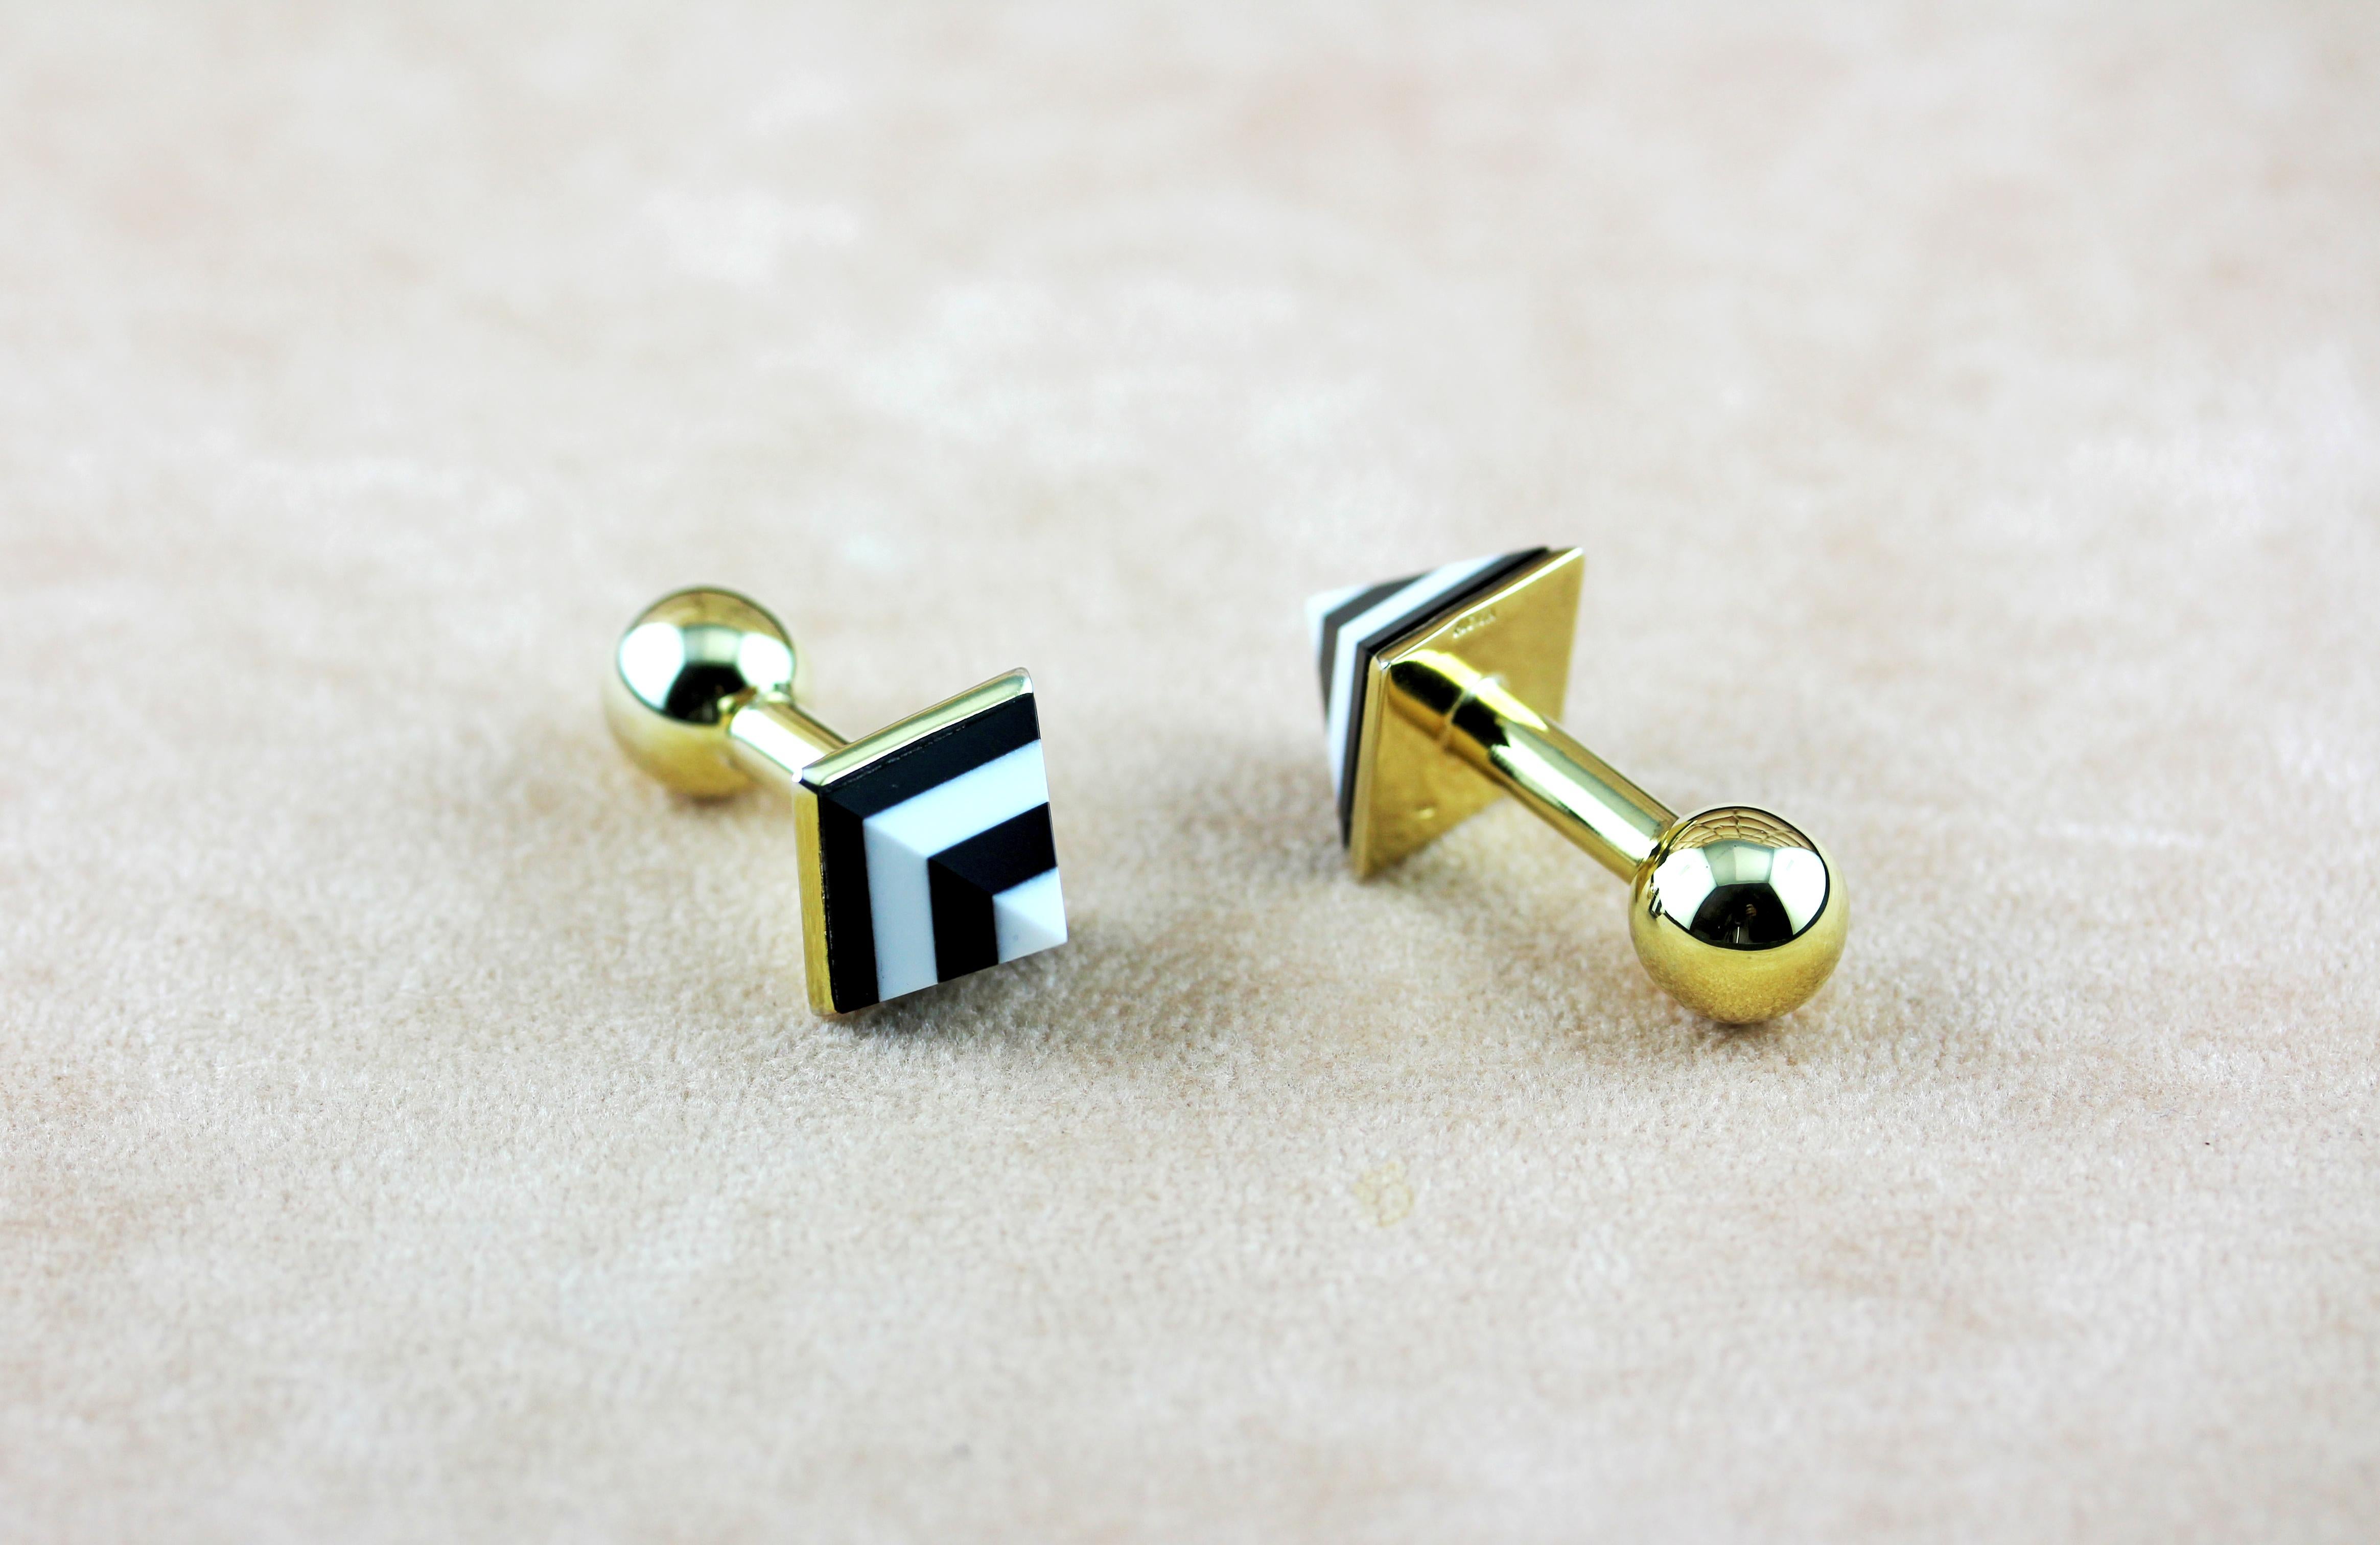 This superb pair of cufflinks feature a spherical toggle and minimalist post in 18 karat yellow gold , while the front face is in the shape of a pyramid mounted featuring layers of white agate and onyx alternating for a timeless effect. 

All